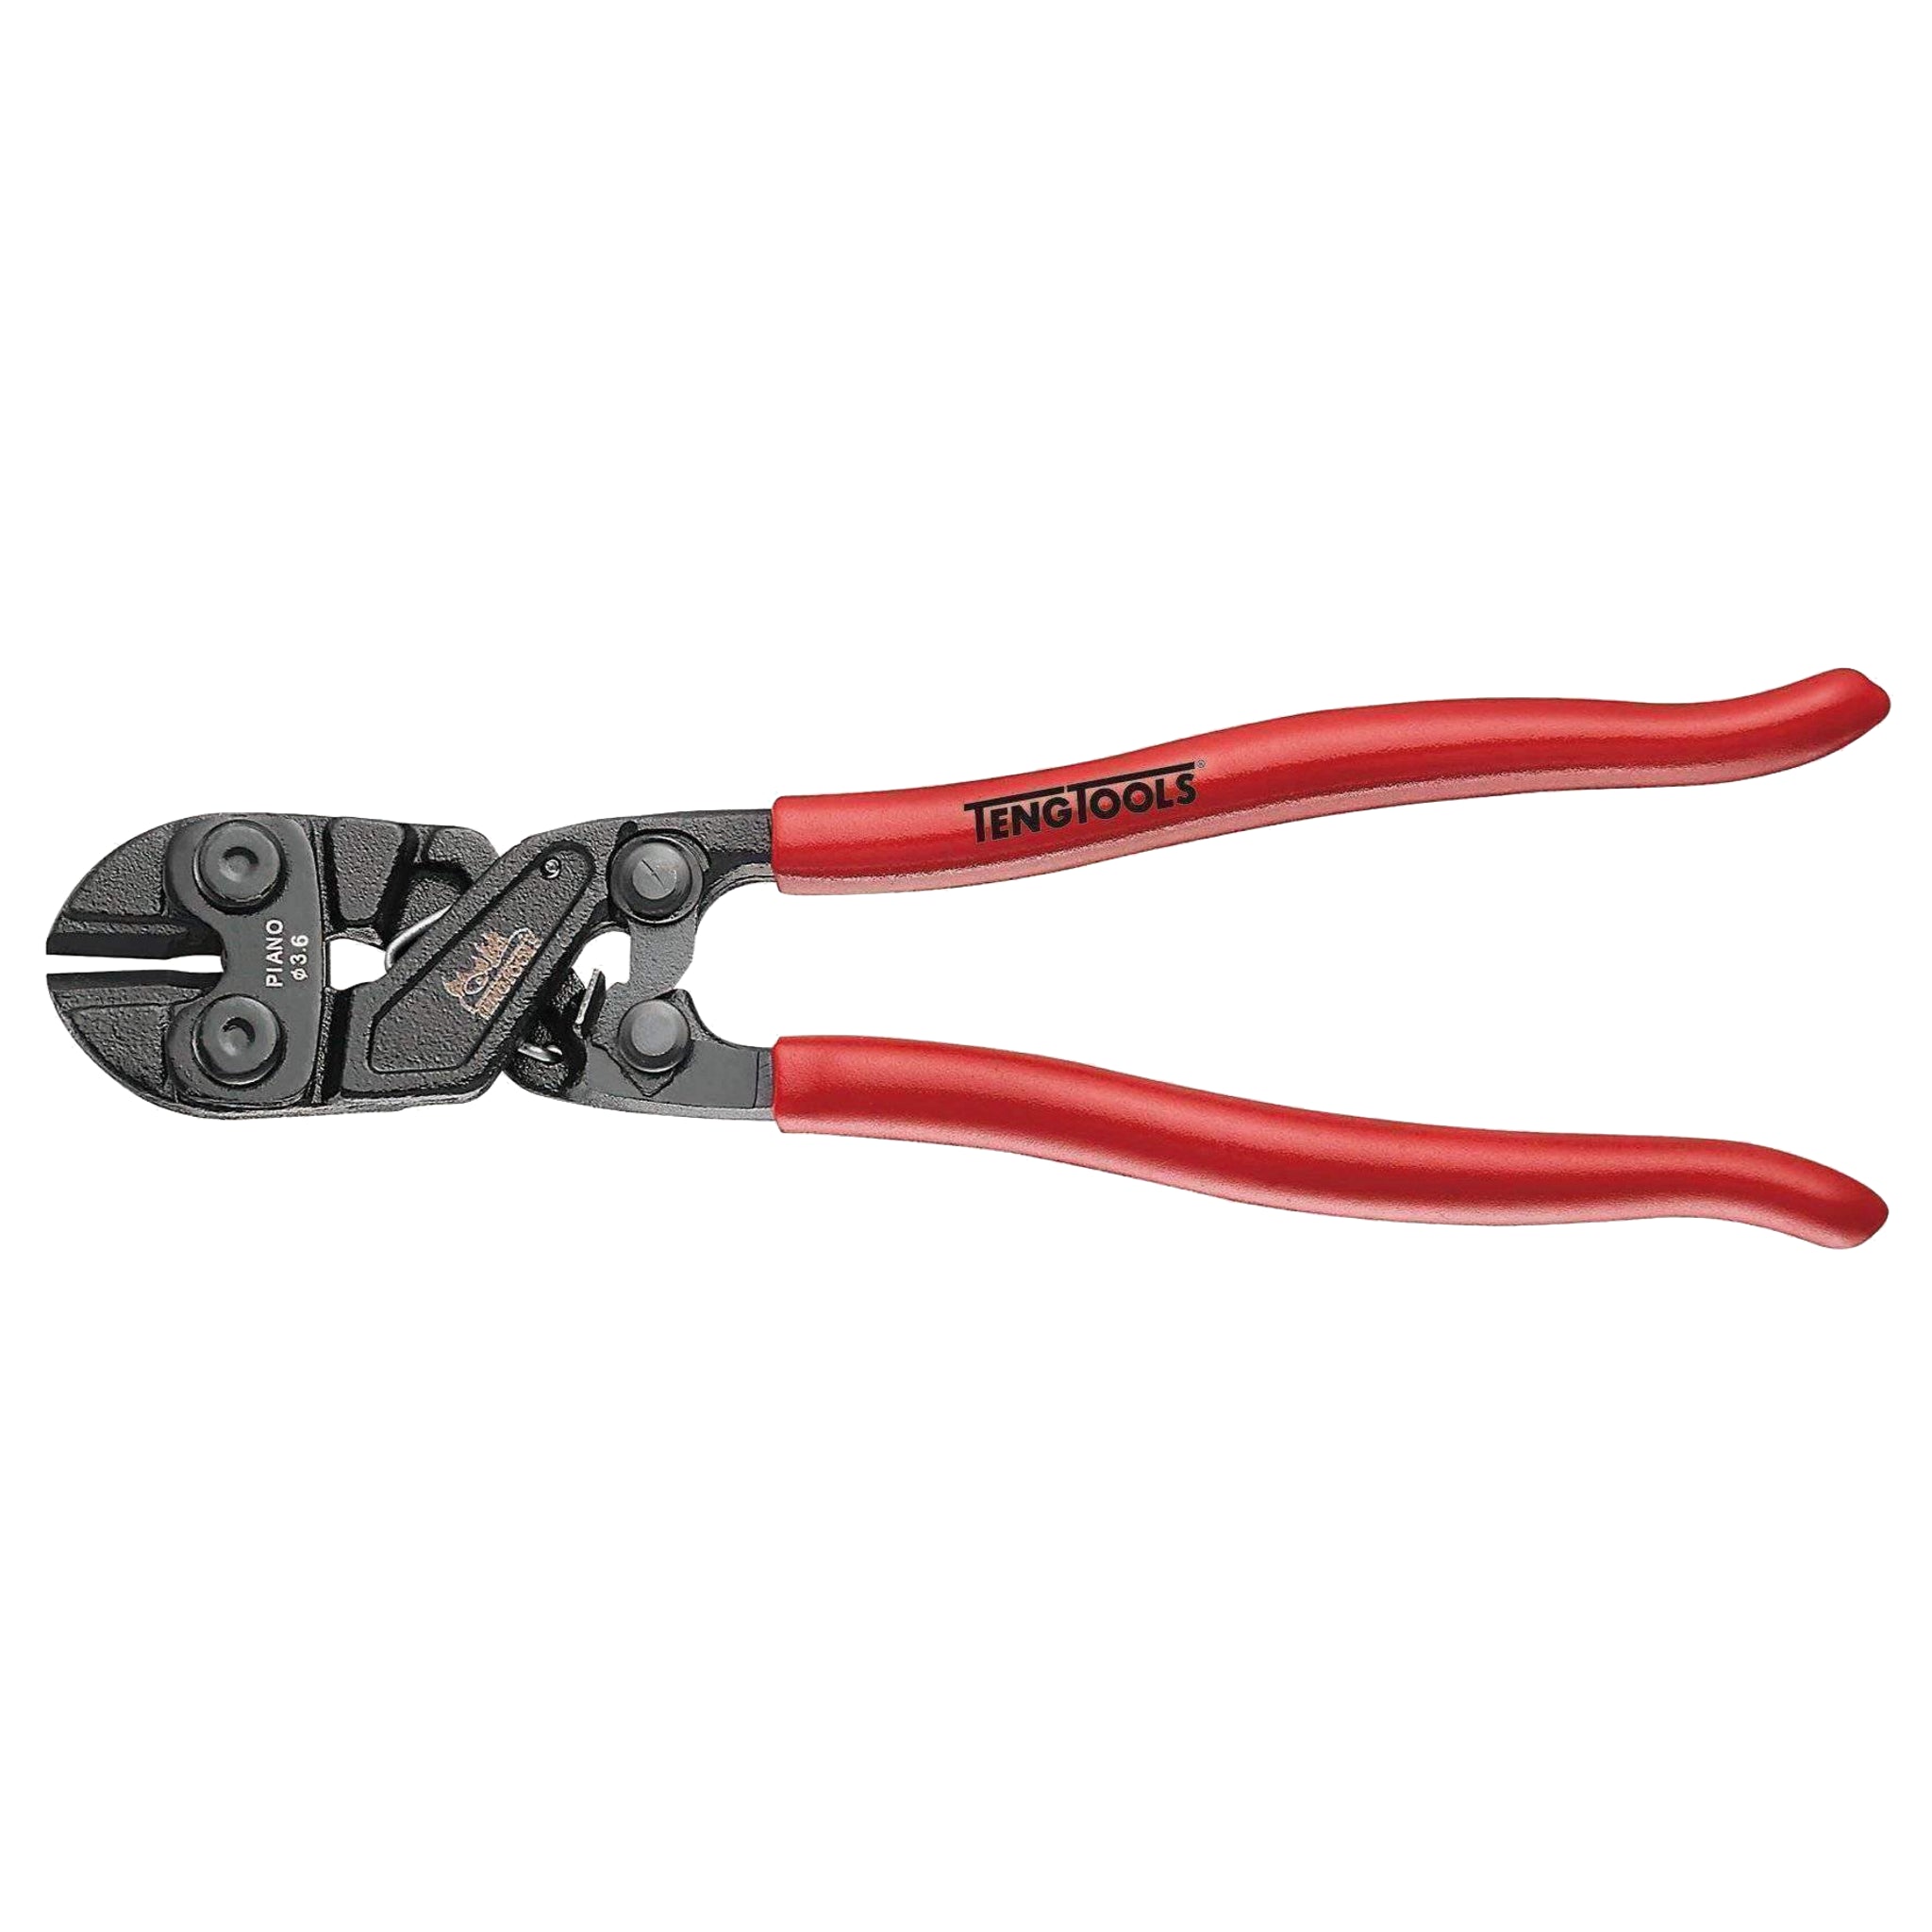 Teng Tools Bolt Cutters With Dipped Handle 8 To 36 Inches - 8 Inch Mini